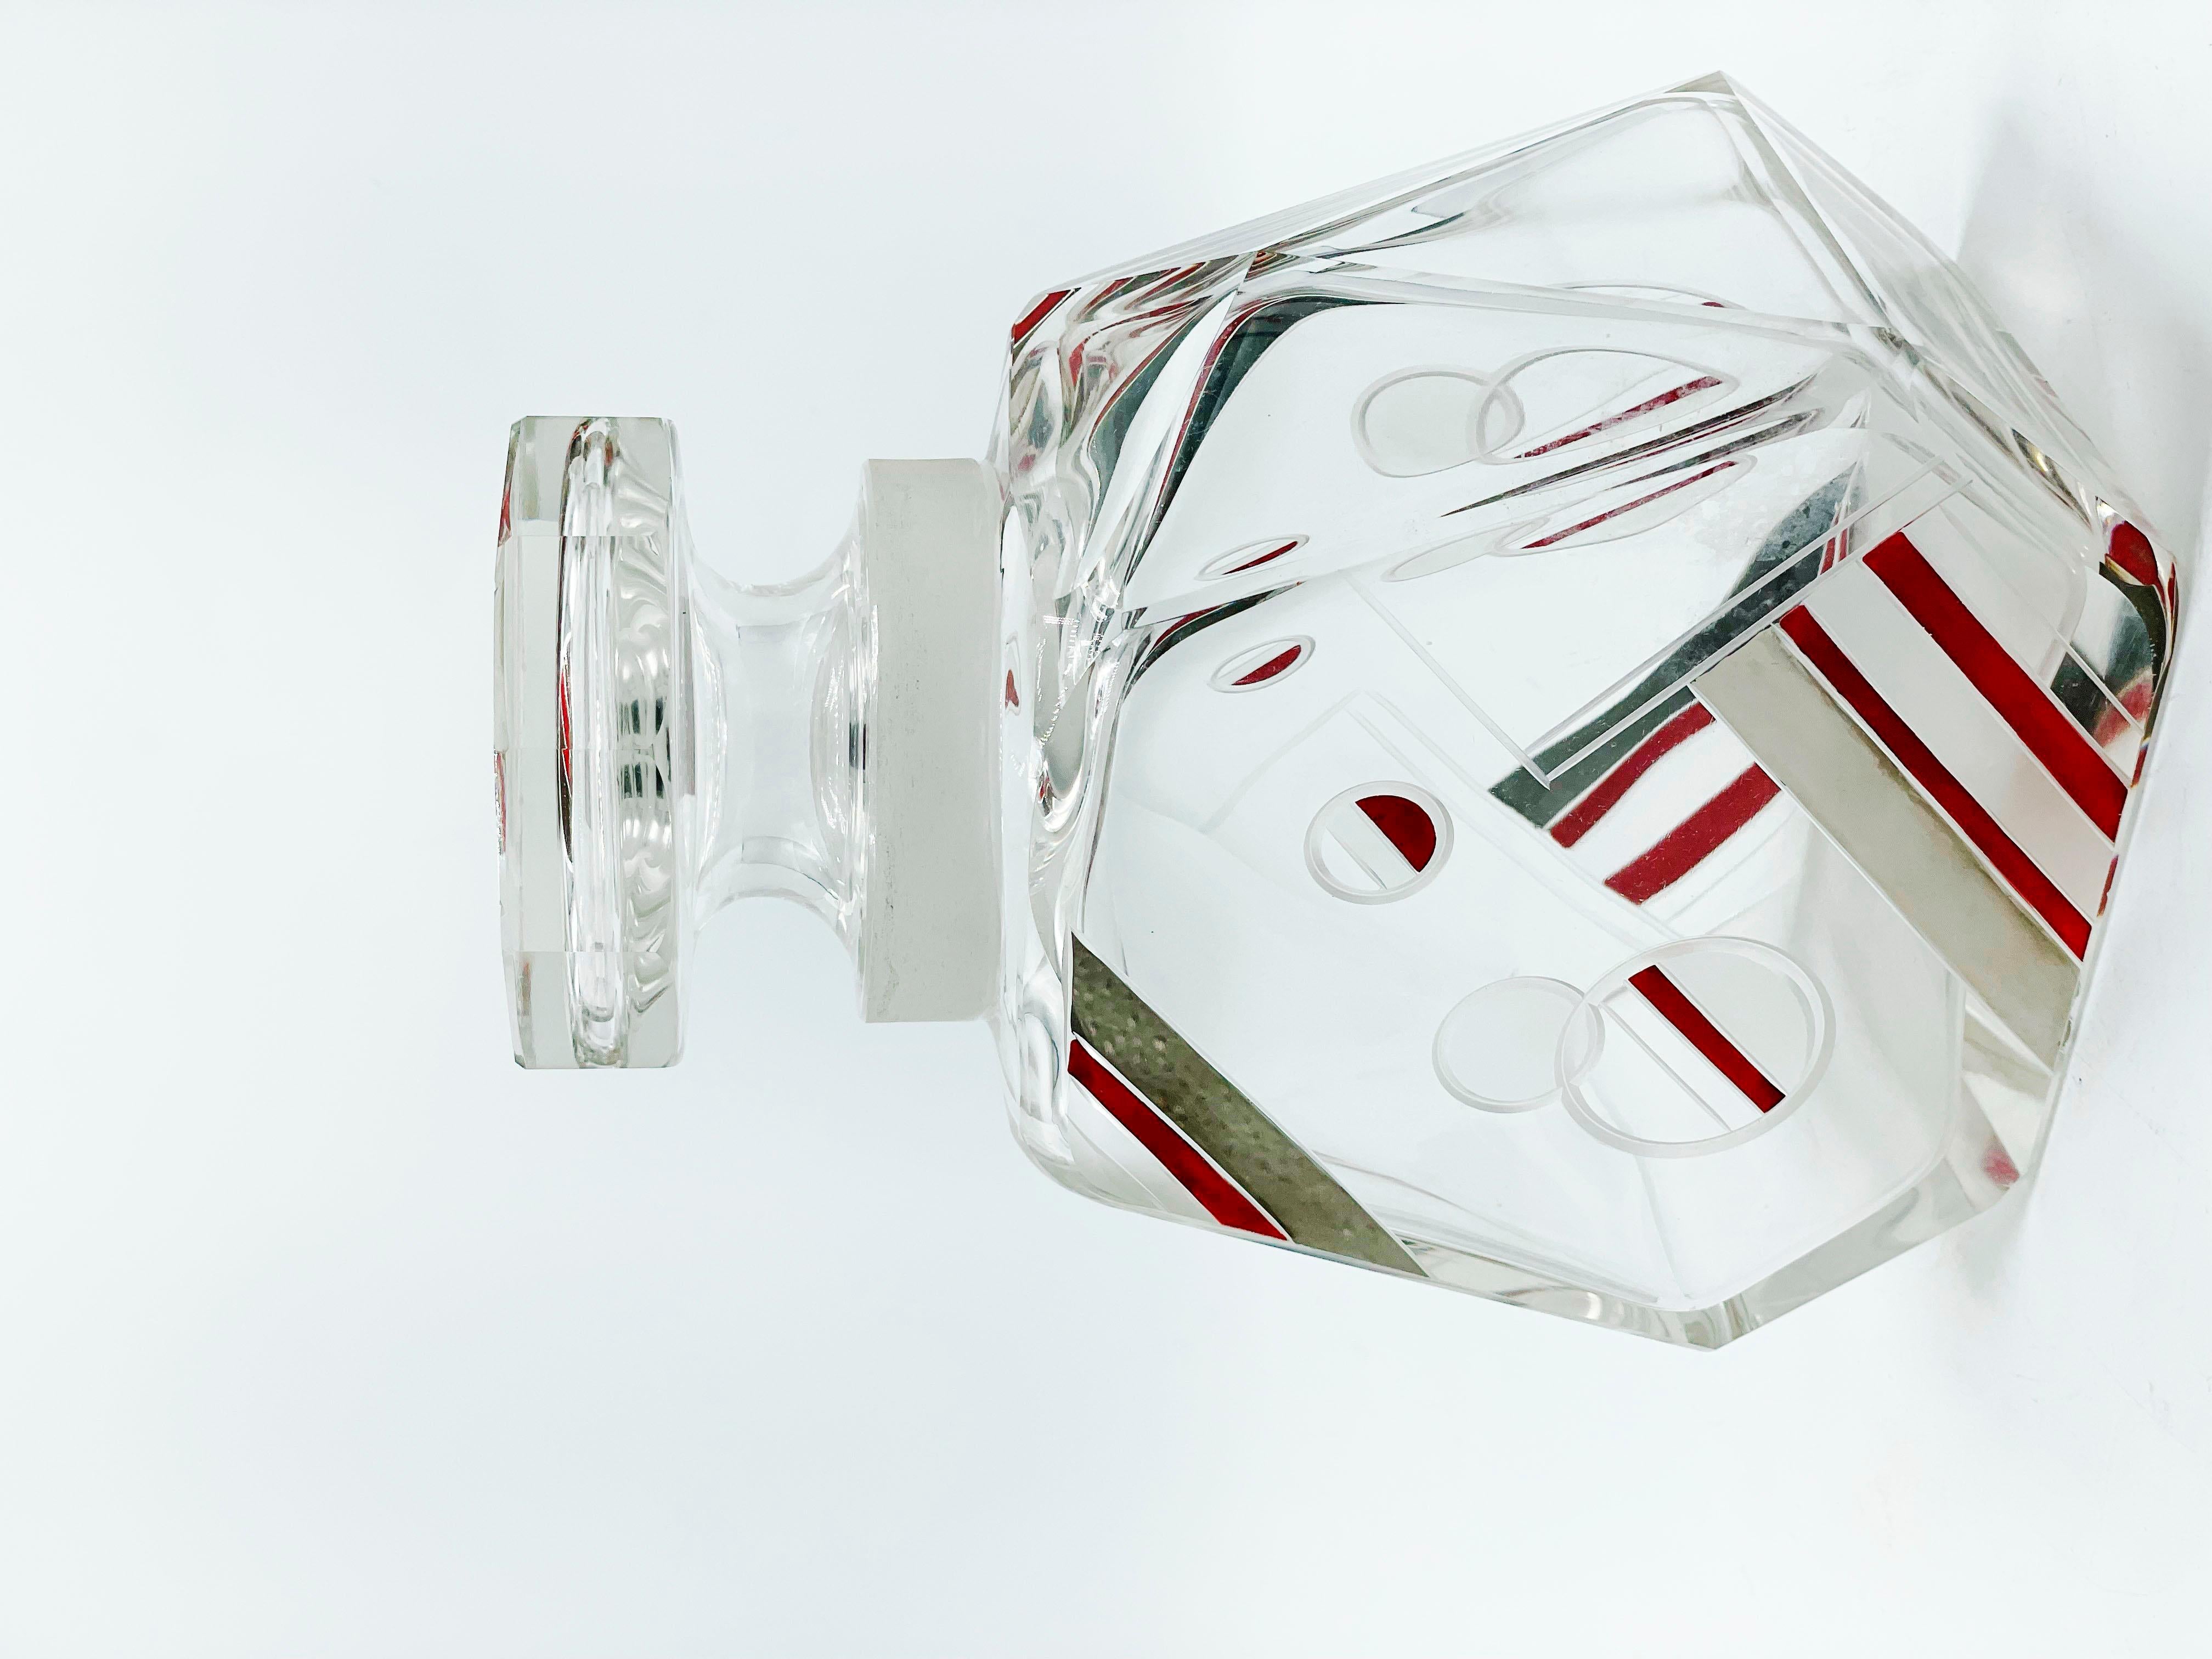 Art Deco Cut Crystal Decanter by Karl Palda
This piece, both the shape design and the crystal pattern design are made of geometric shapes, endowed with red and silver circles and lines. The cap also consists of the same design as the main